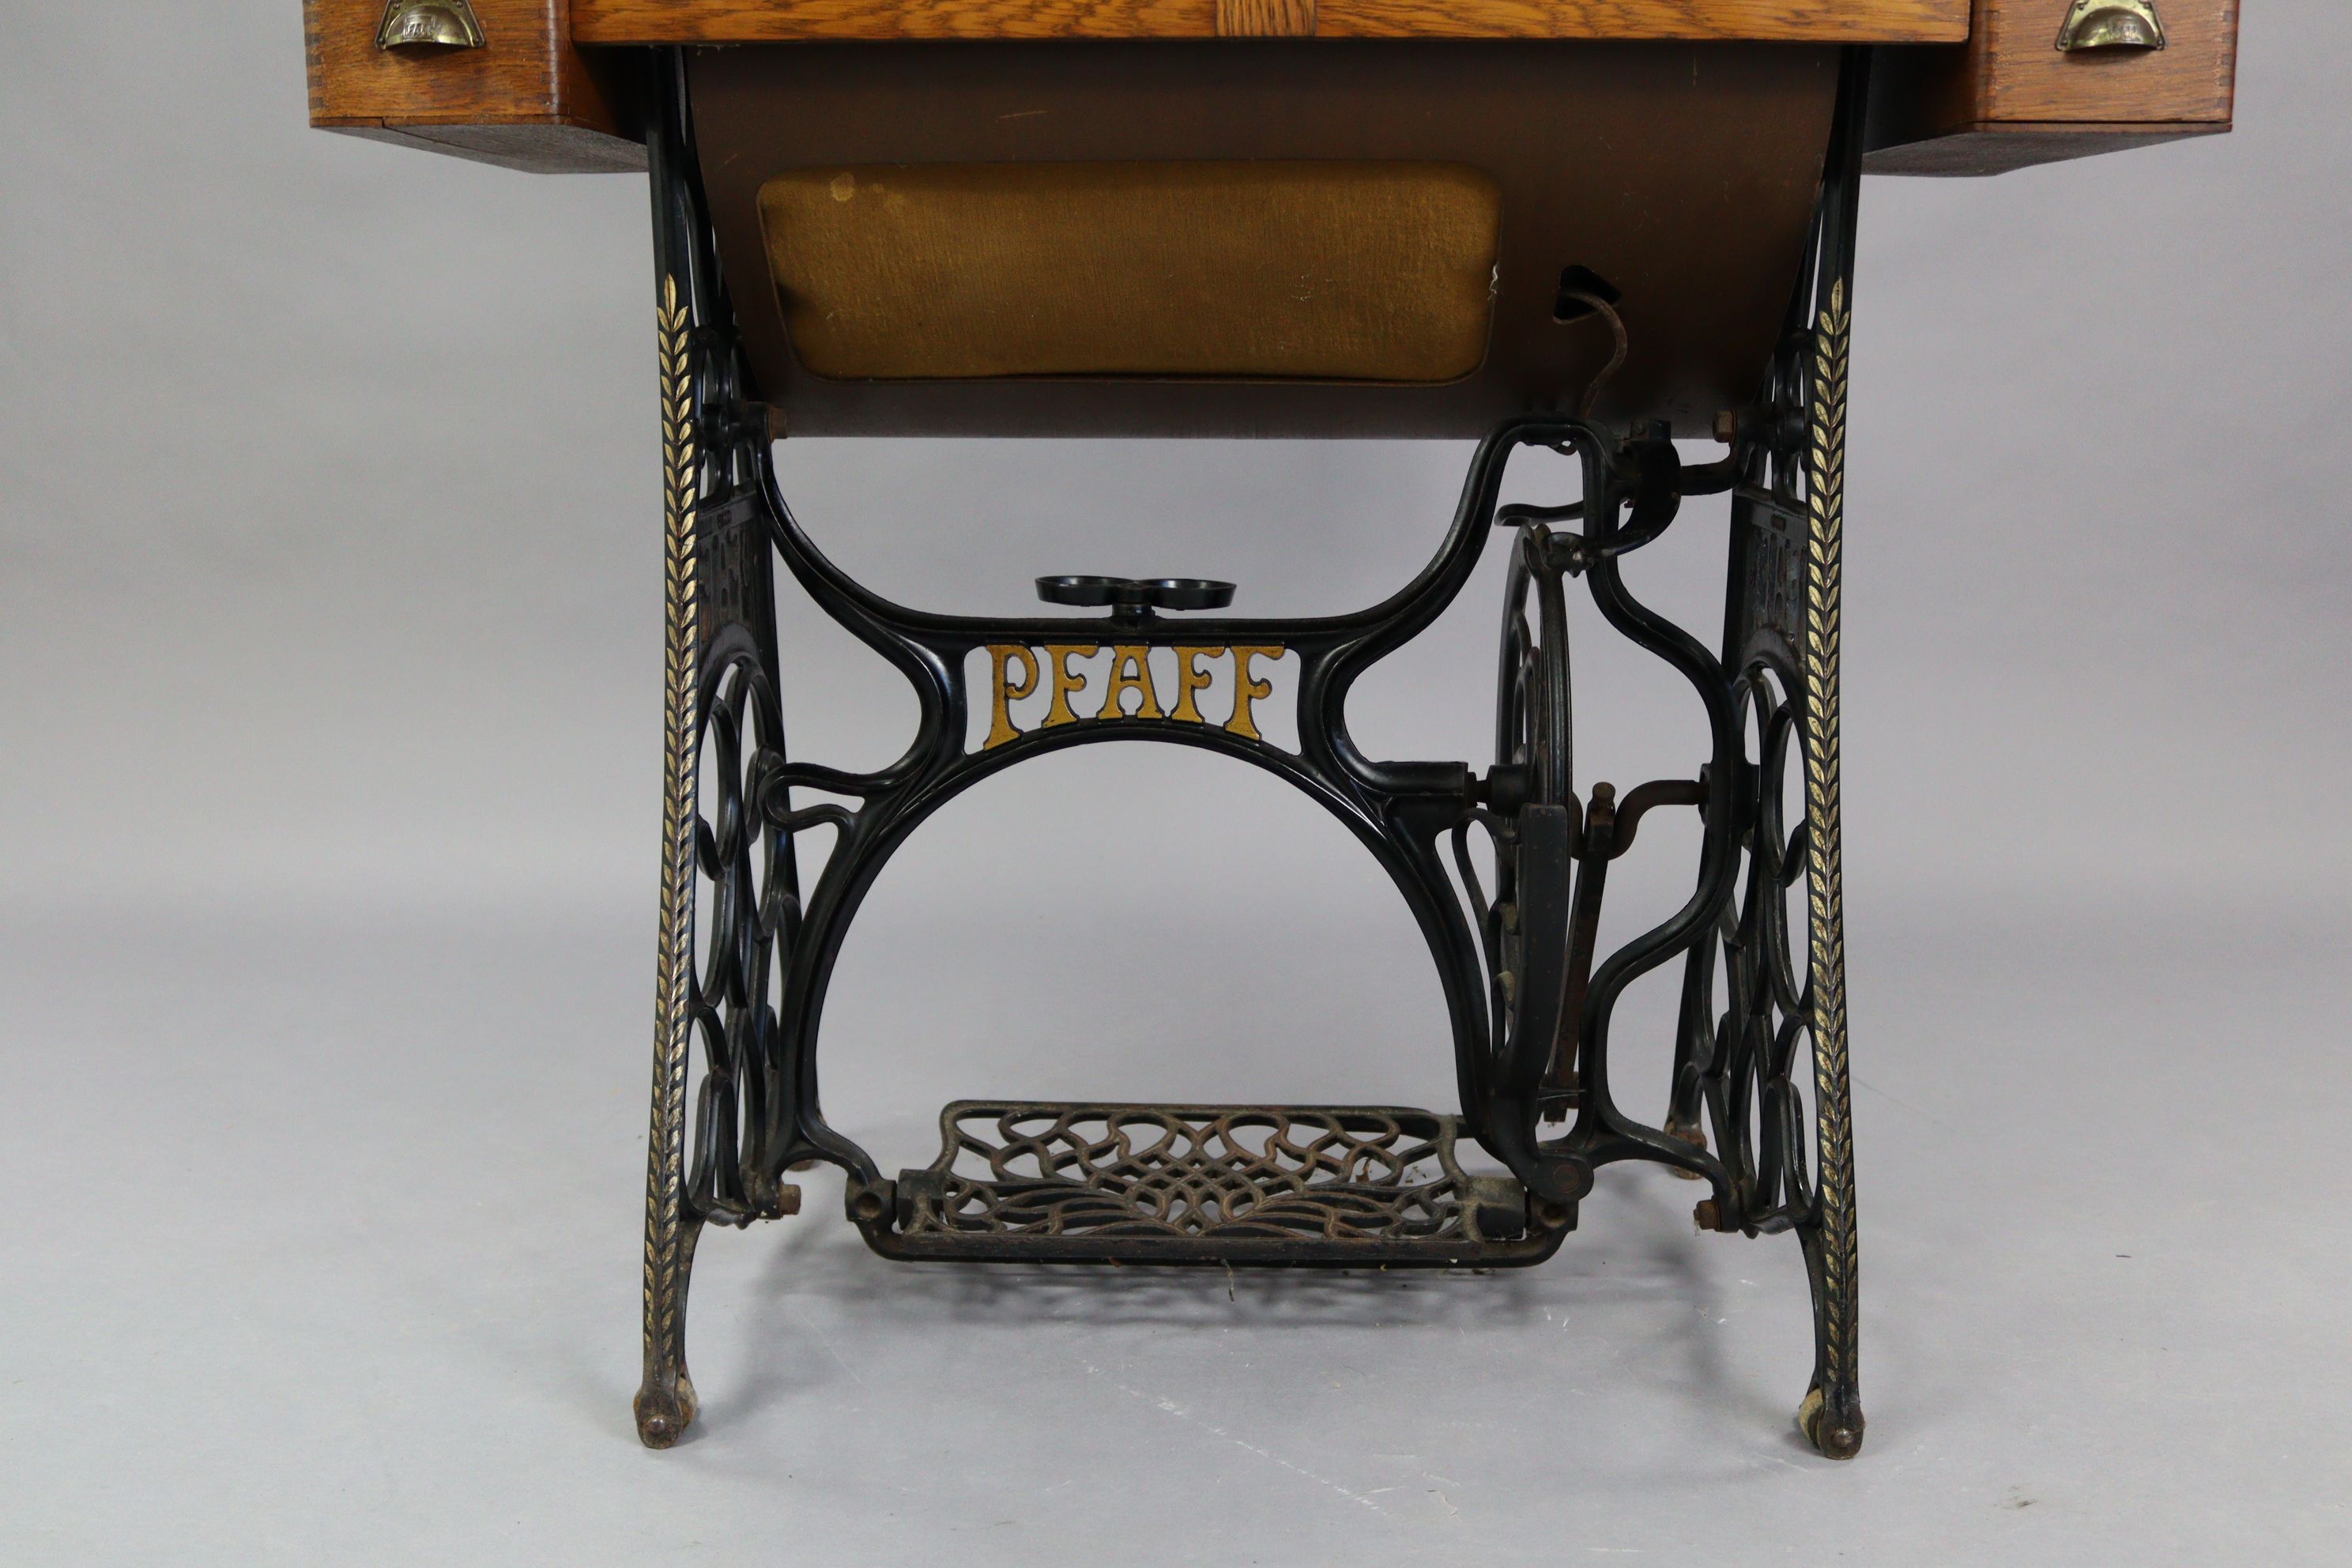 An early 20th century Pfaff treadle sewing machine in oak case, & on cast-iron stand, 37” wide. - Image 5 of 7